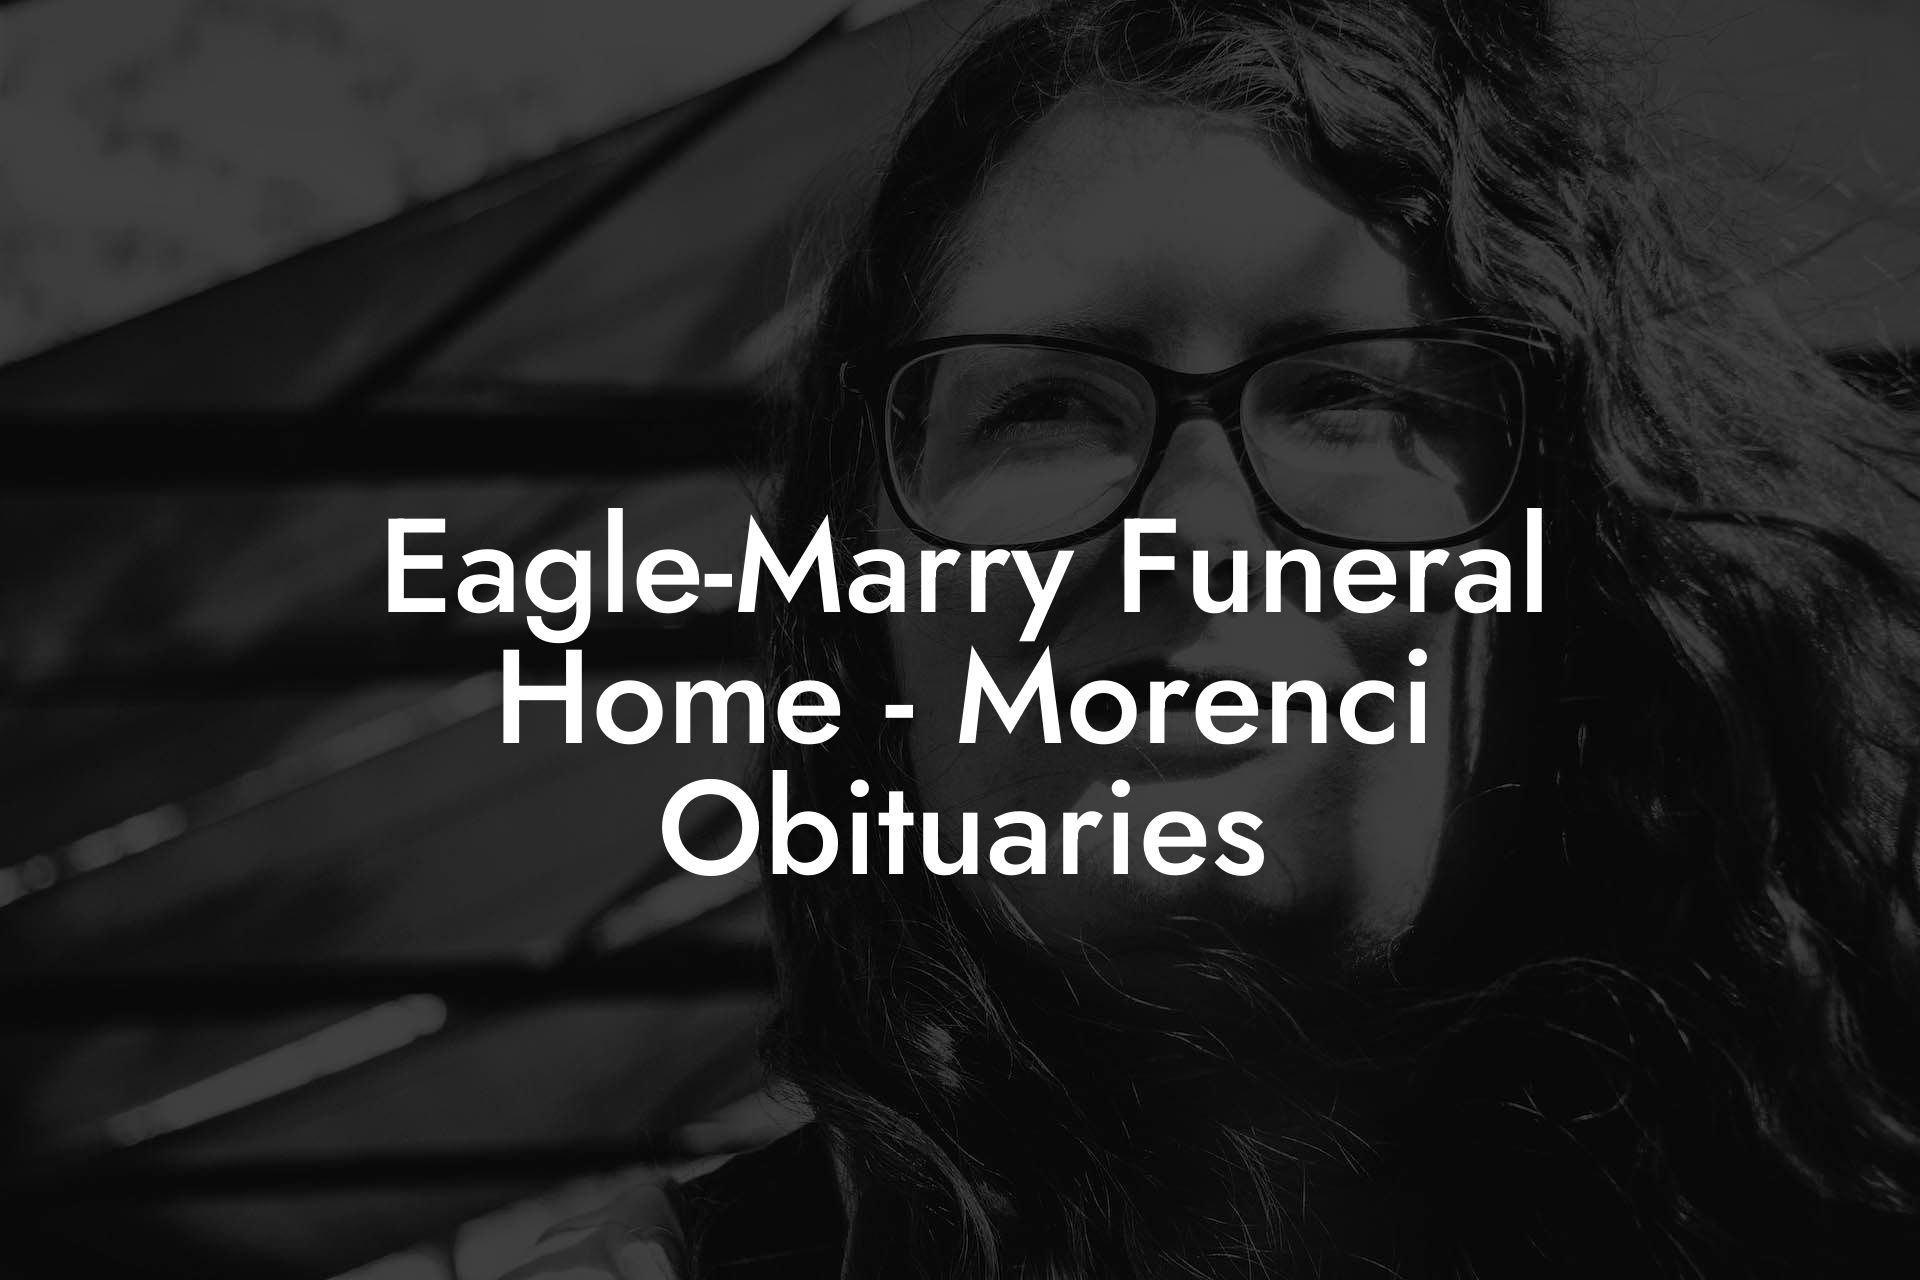 Eagle-Marry Funeral Home - Morenci Obituaries